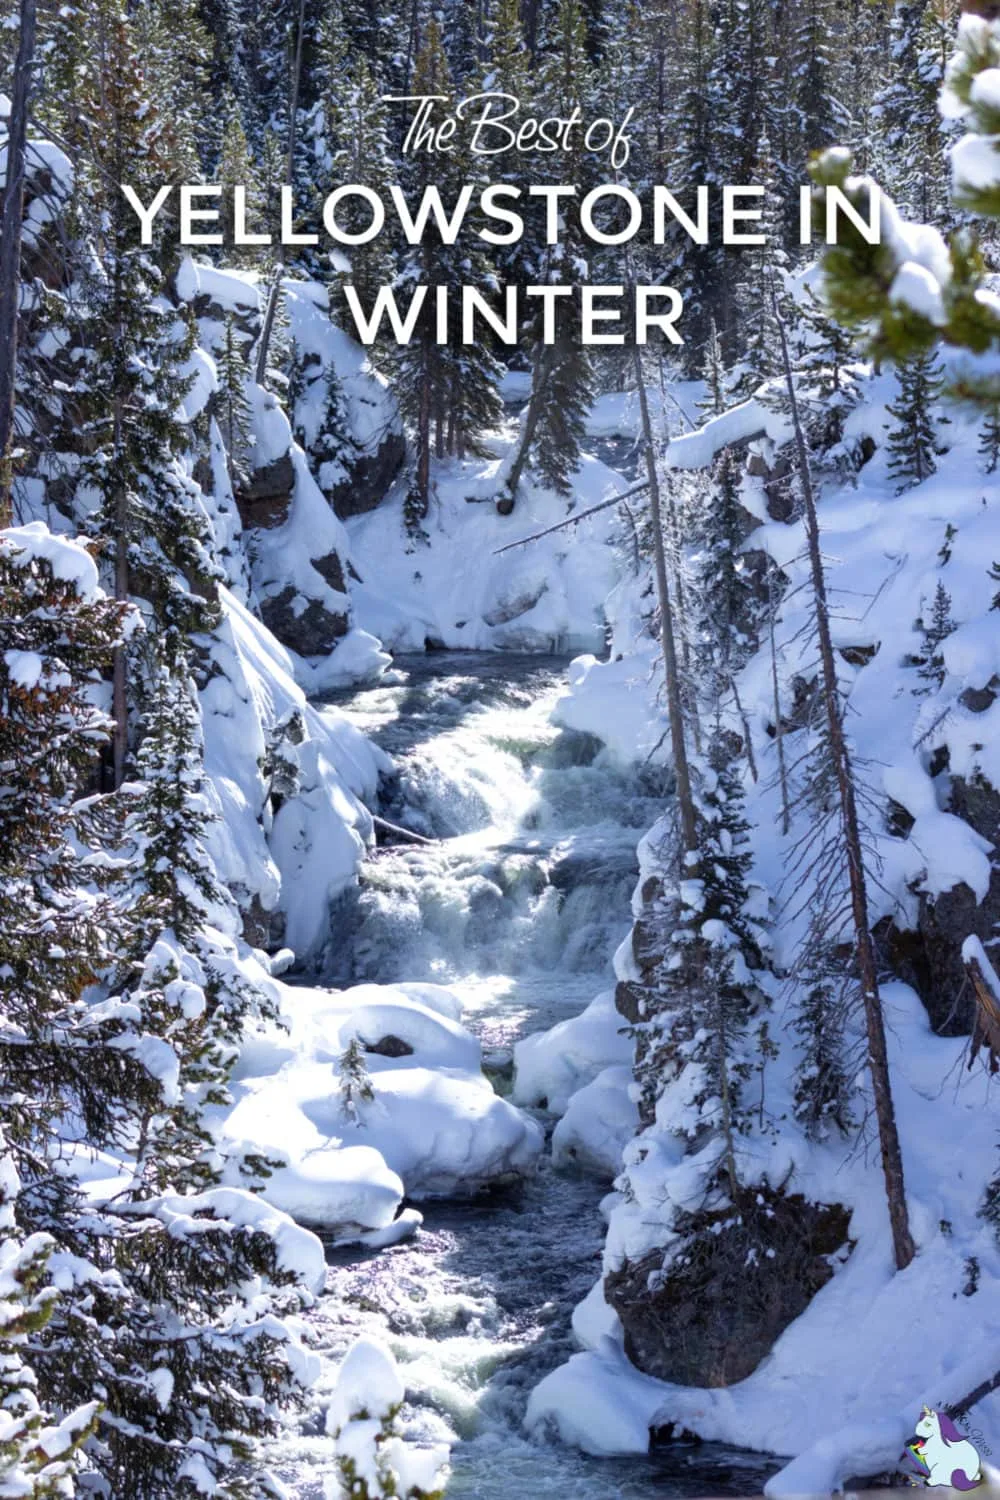 Waterfall in Yellowstone National Park in winter